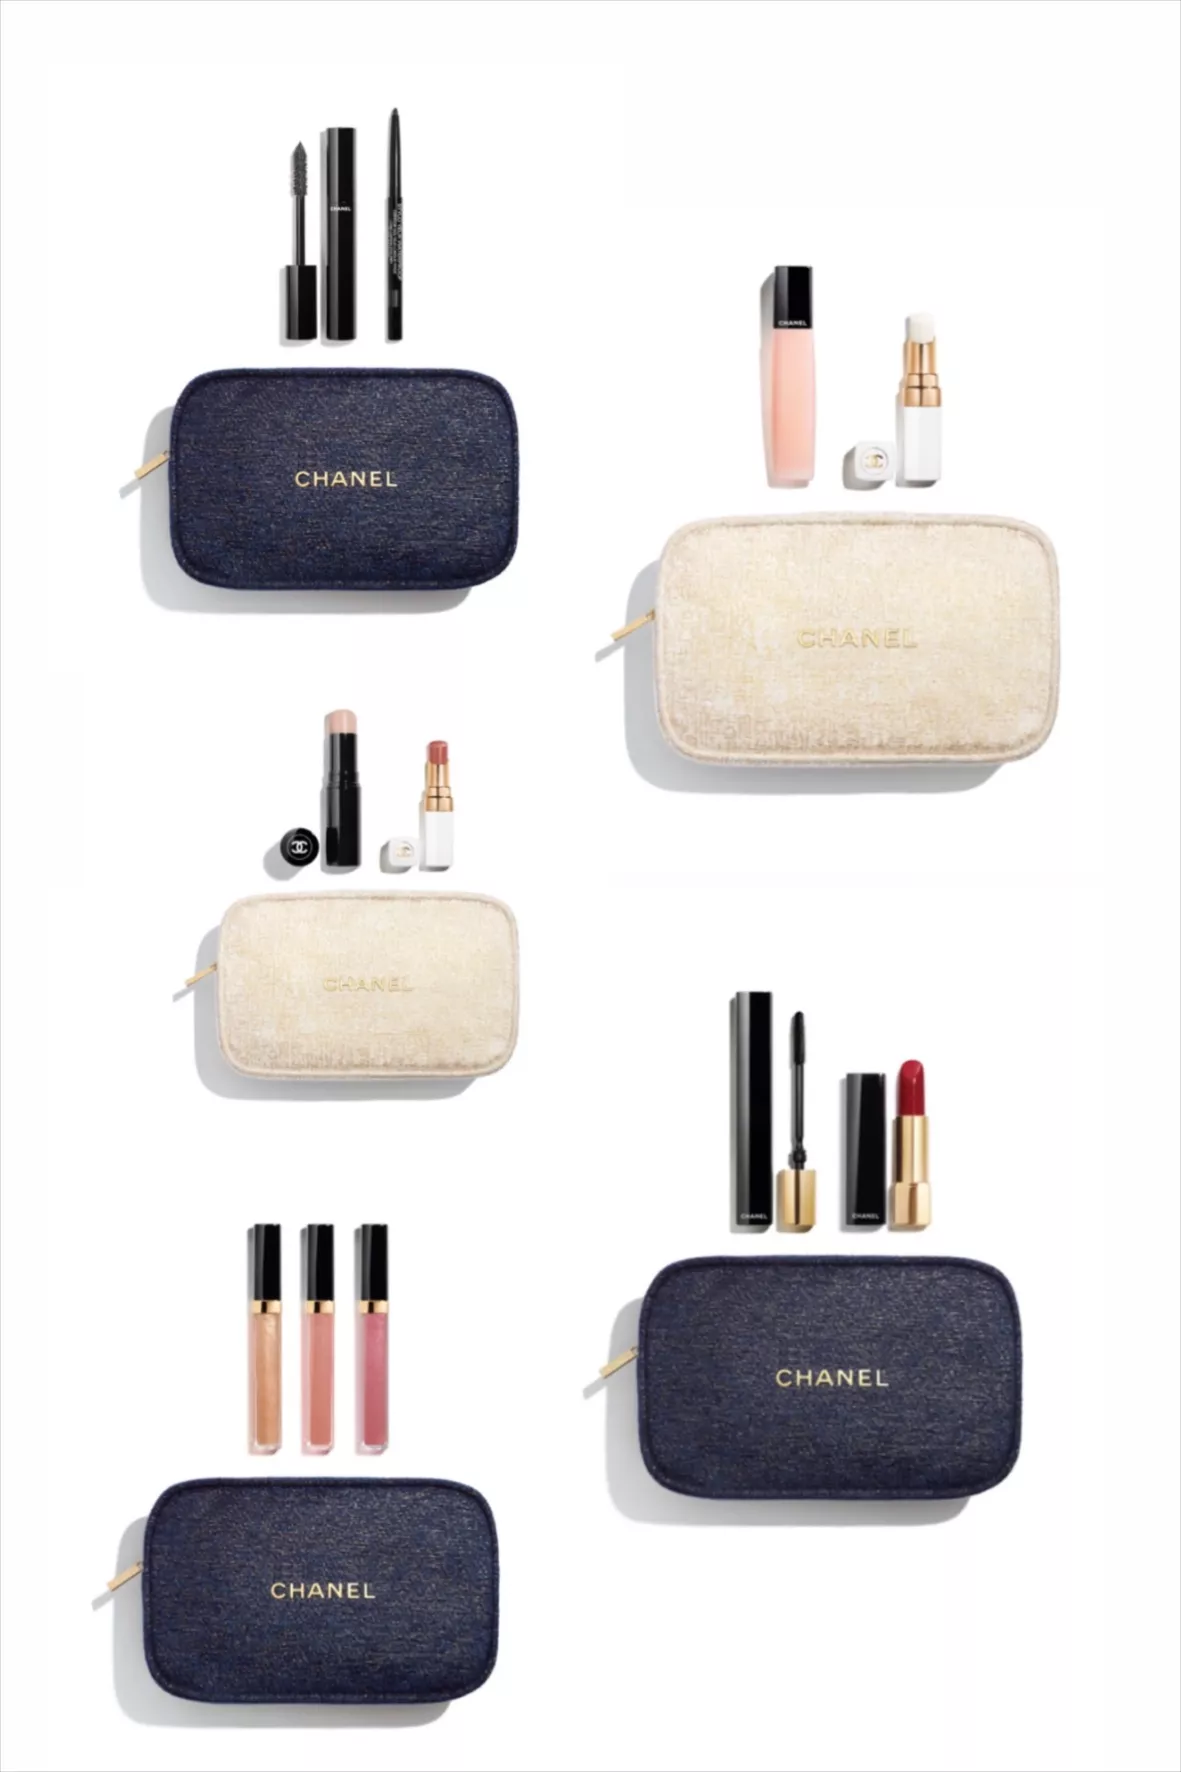 CHANEL 2022 Holiday Makeup Bag & Beauty Gift Sets Available Now – IcanGWP